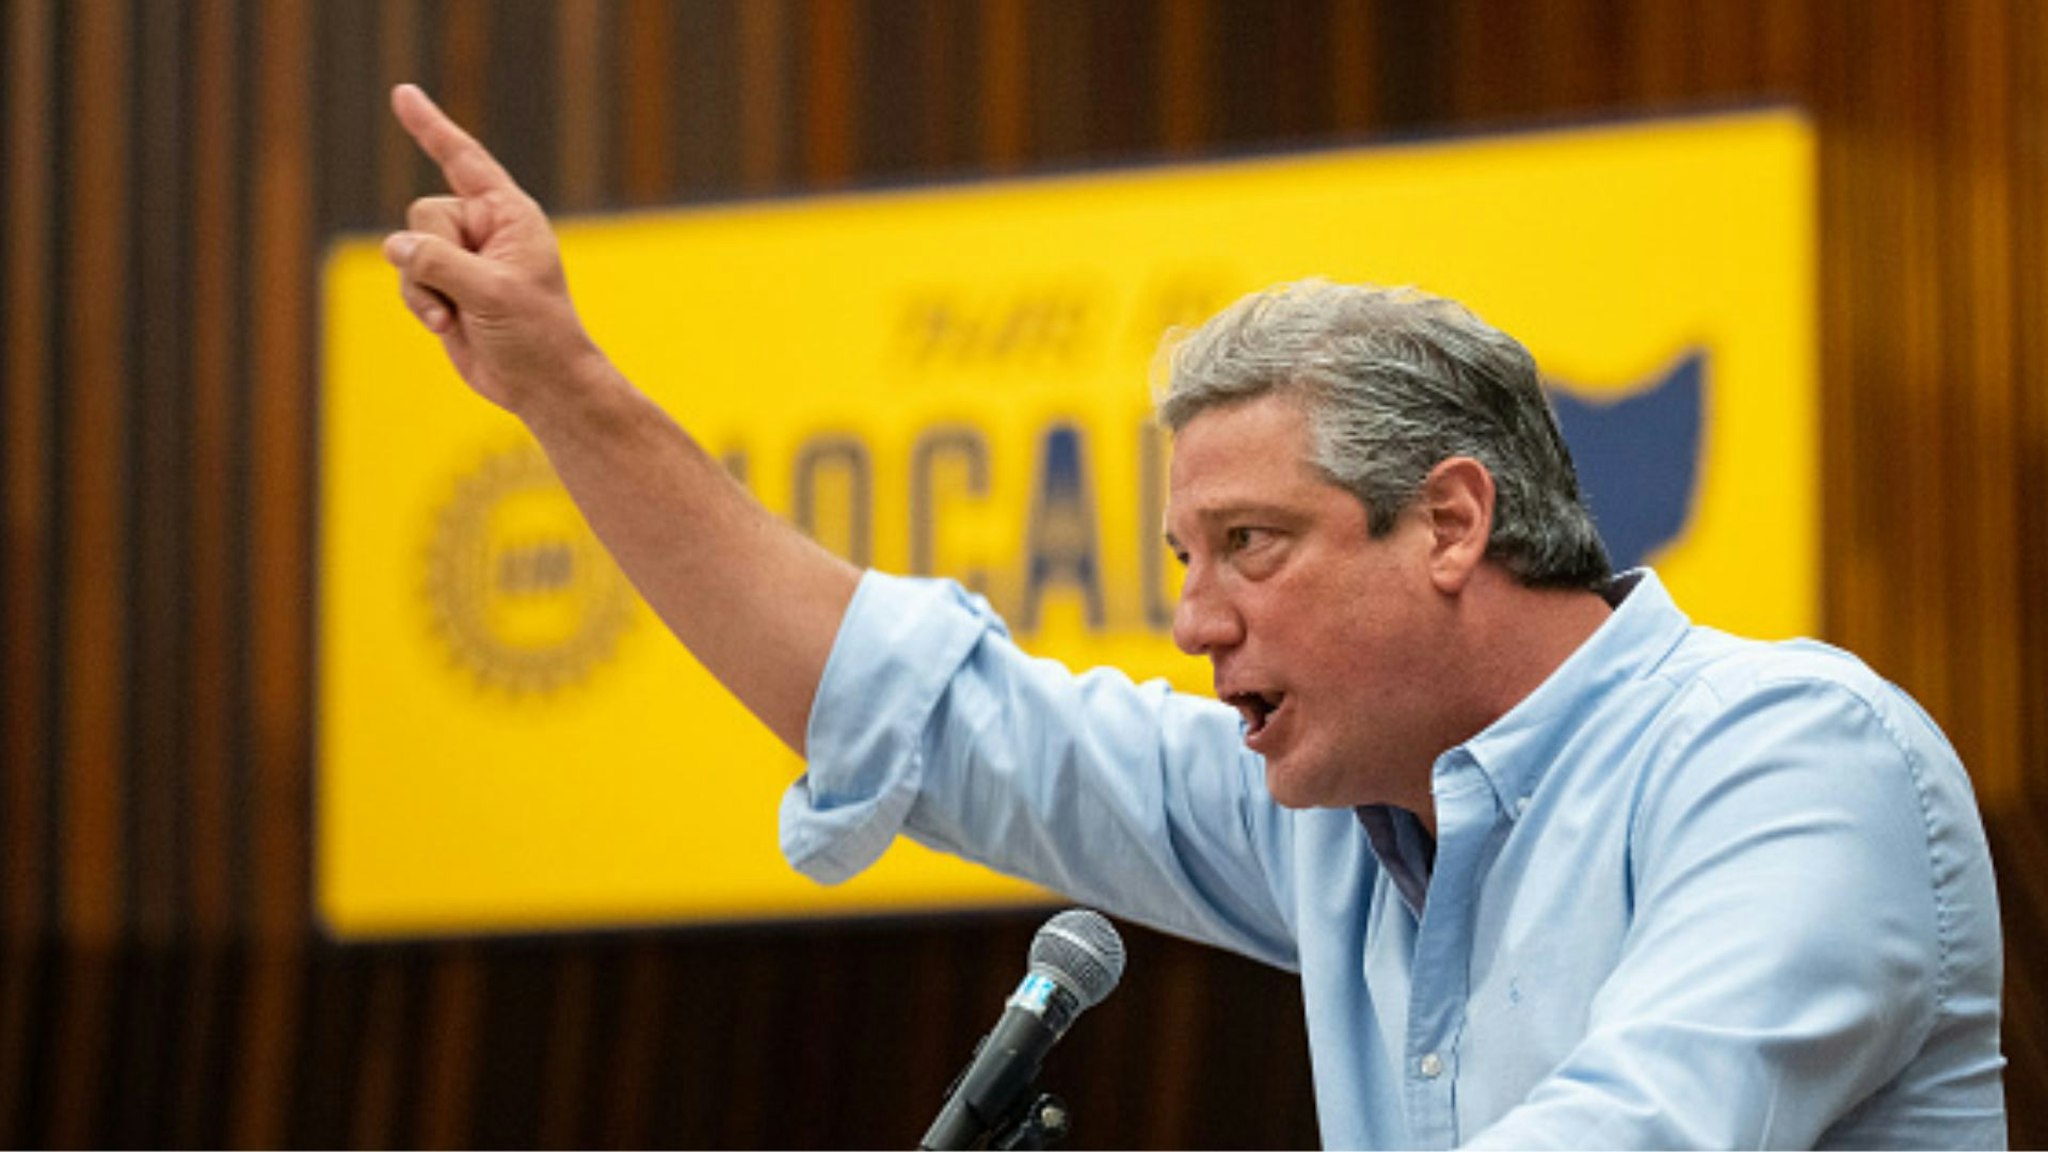 UNITED STATES - AUGUST 20: U.S. Senate candidate Rep. Tim Ryan, D-Ohio, speaks at the UAW Local 12 union rally in Toledo, Ohio on Saturday, August 20, 2022.